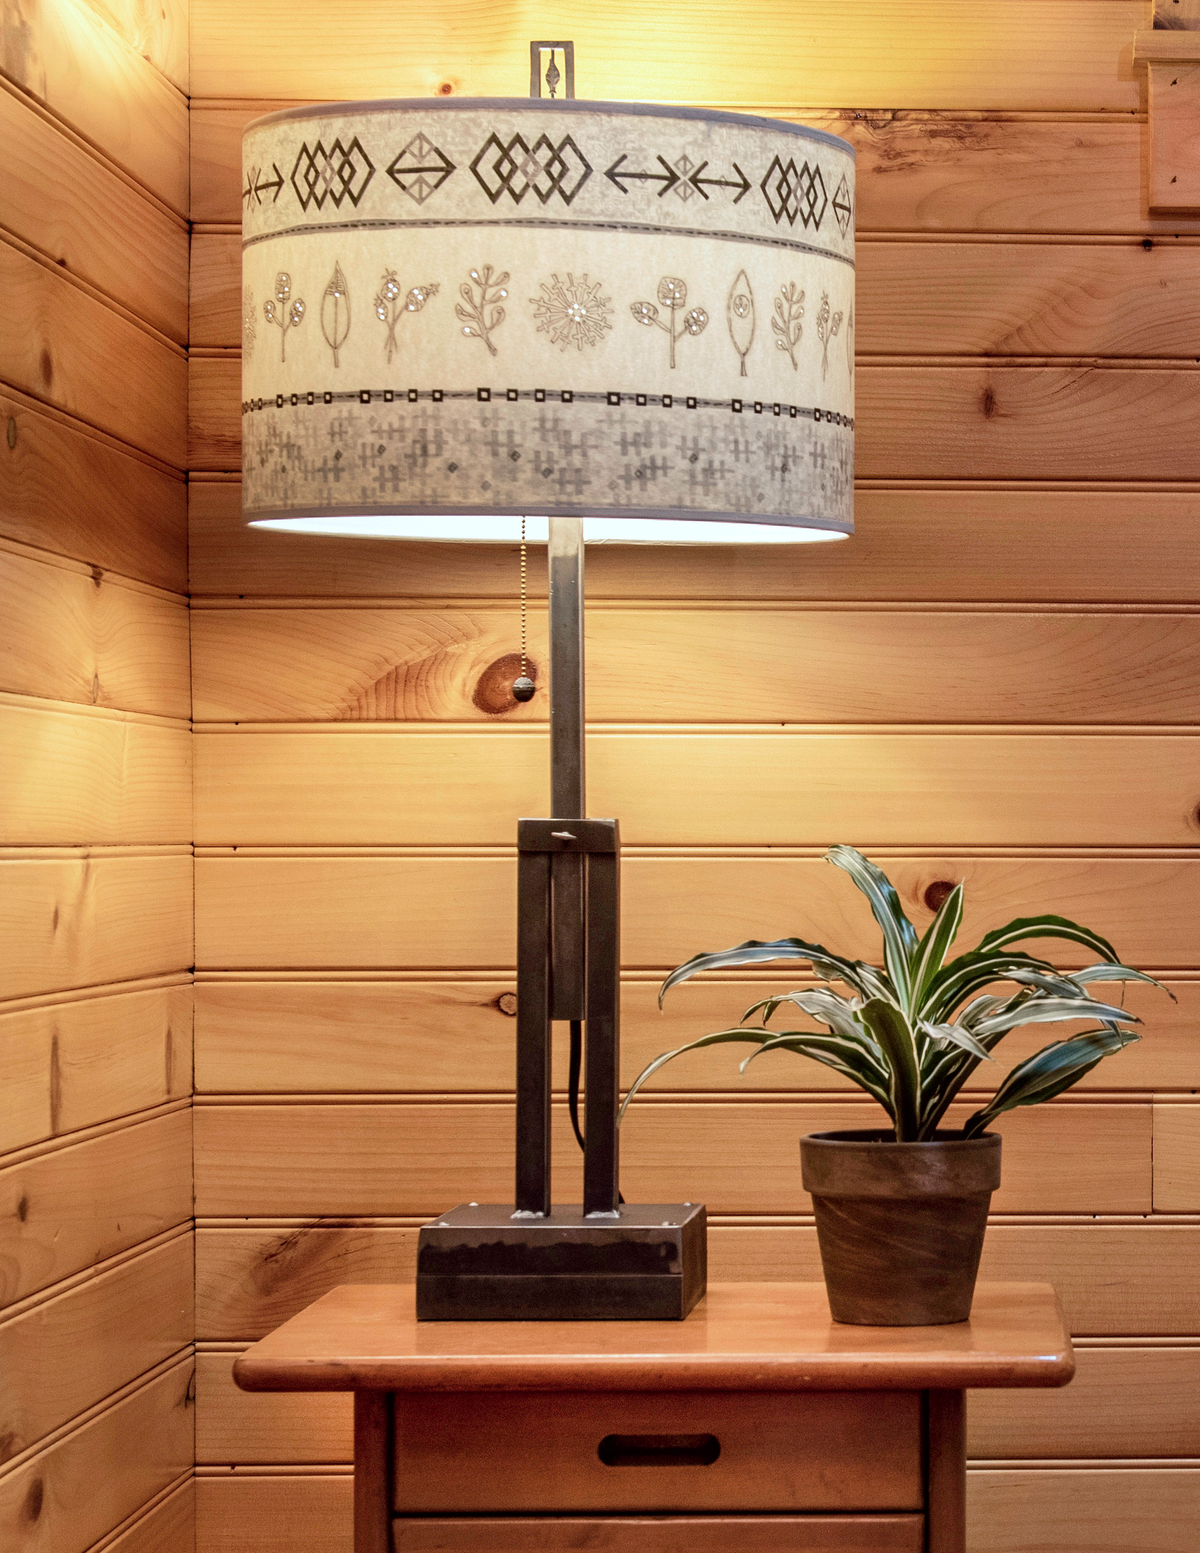 Adjustable-Height Steel Table Lamp with Large Drum Shade in Wovens &amp; Spring in Mist